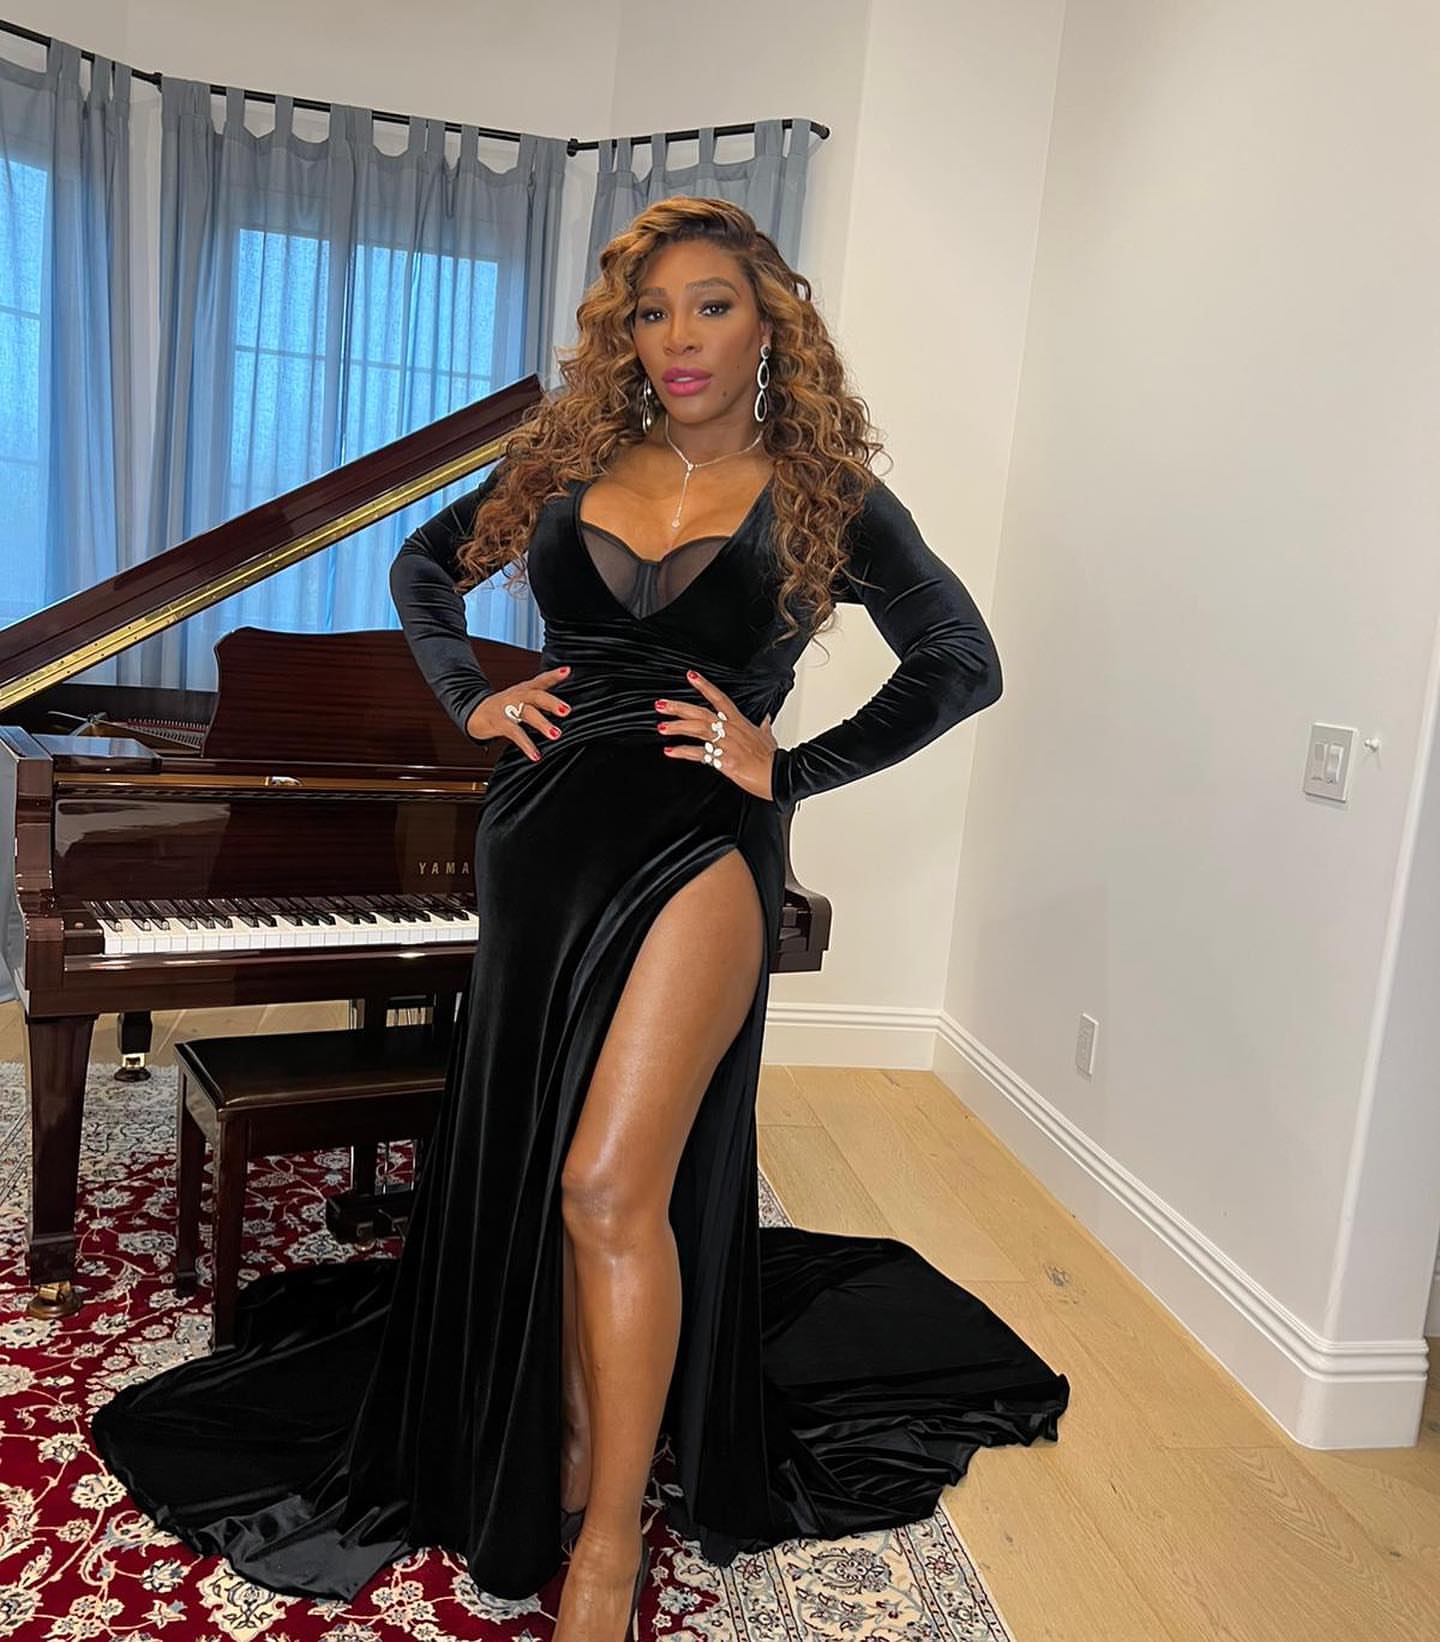 Serena Williams Shares a Pregnancy Workout! - Photo 10